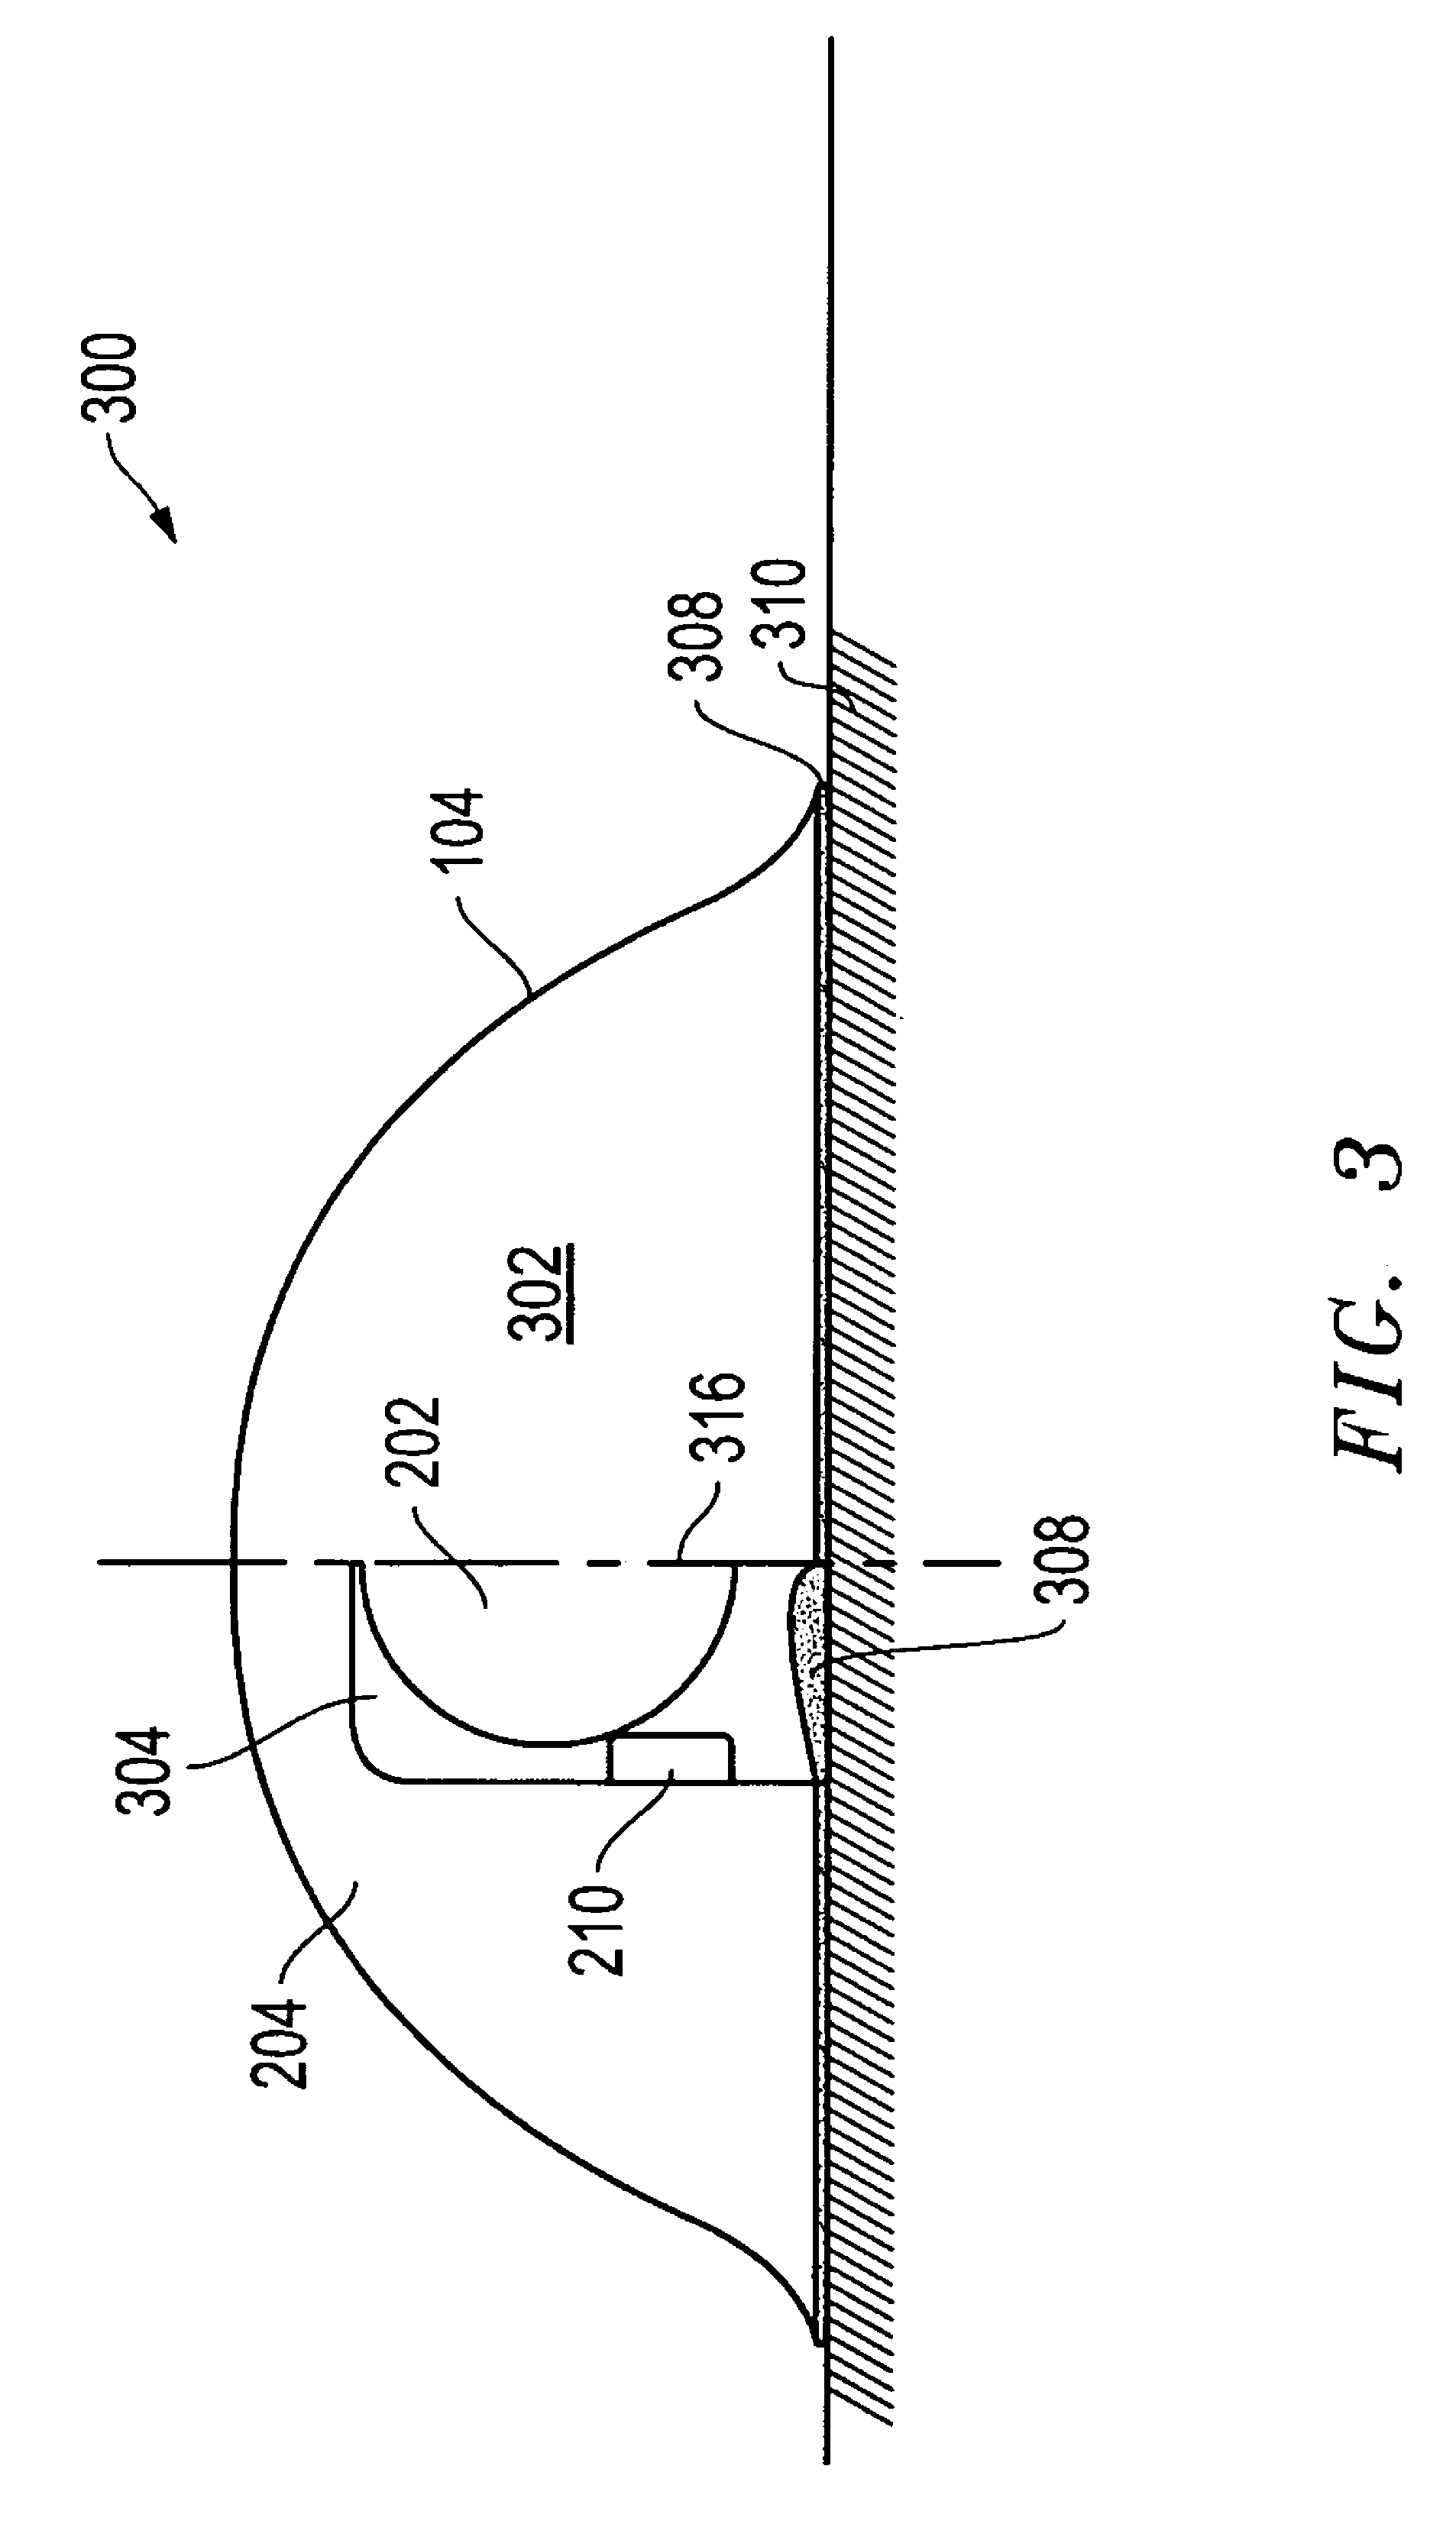 Tamper resistant RFID tags and associated methods